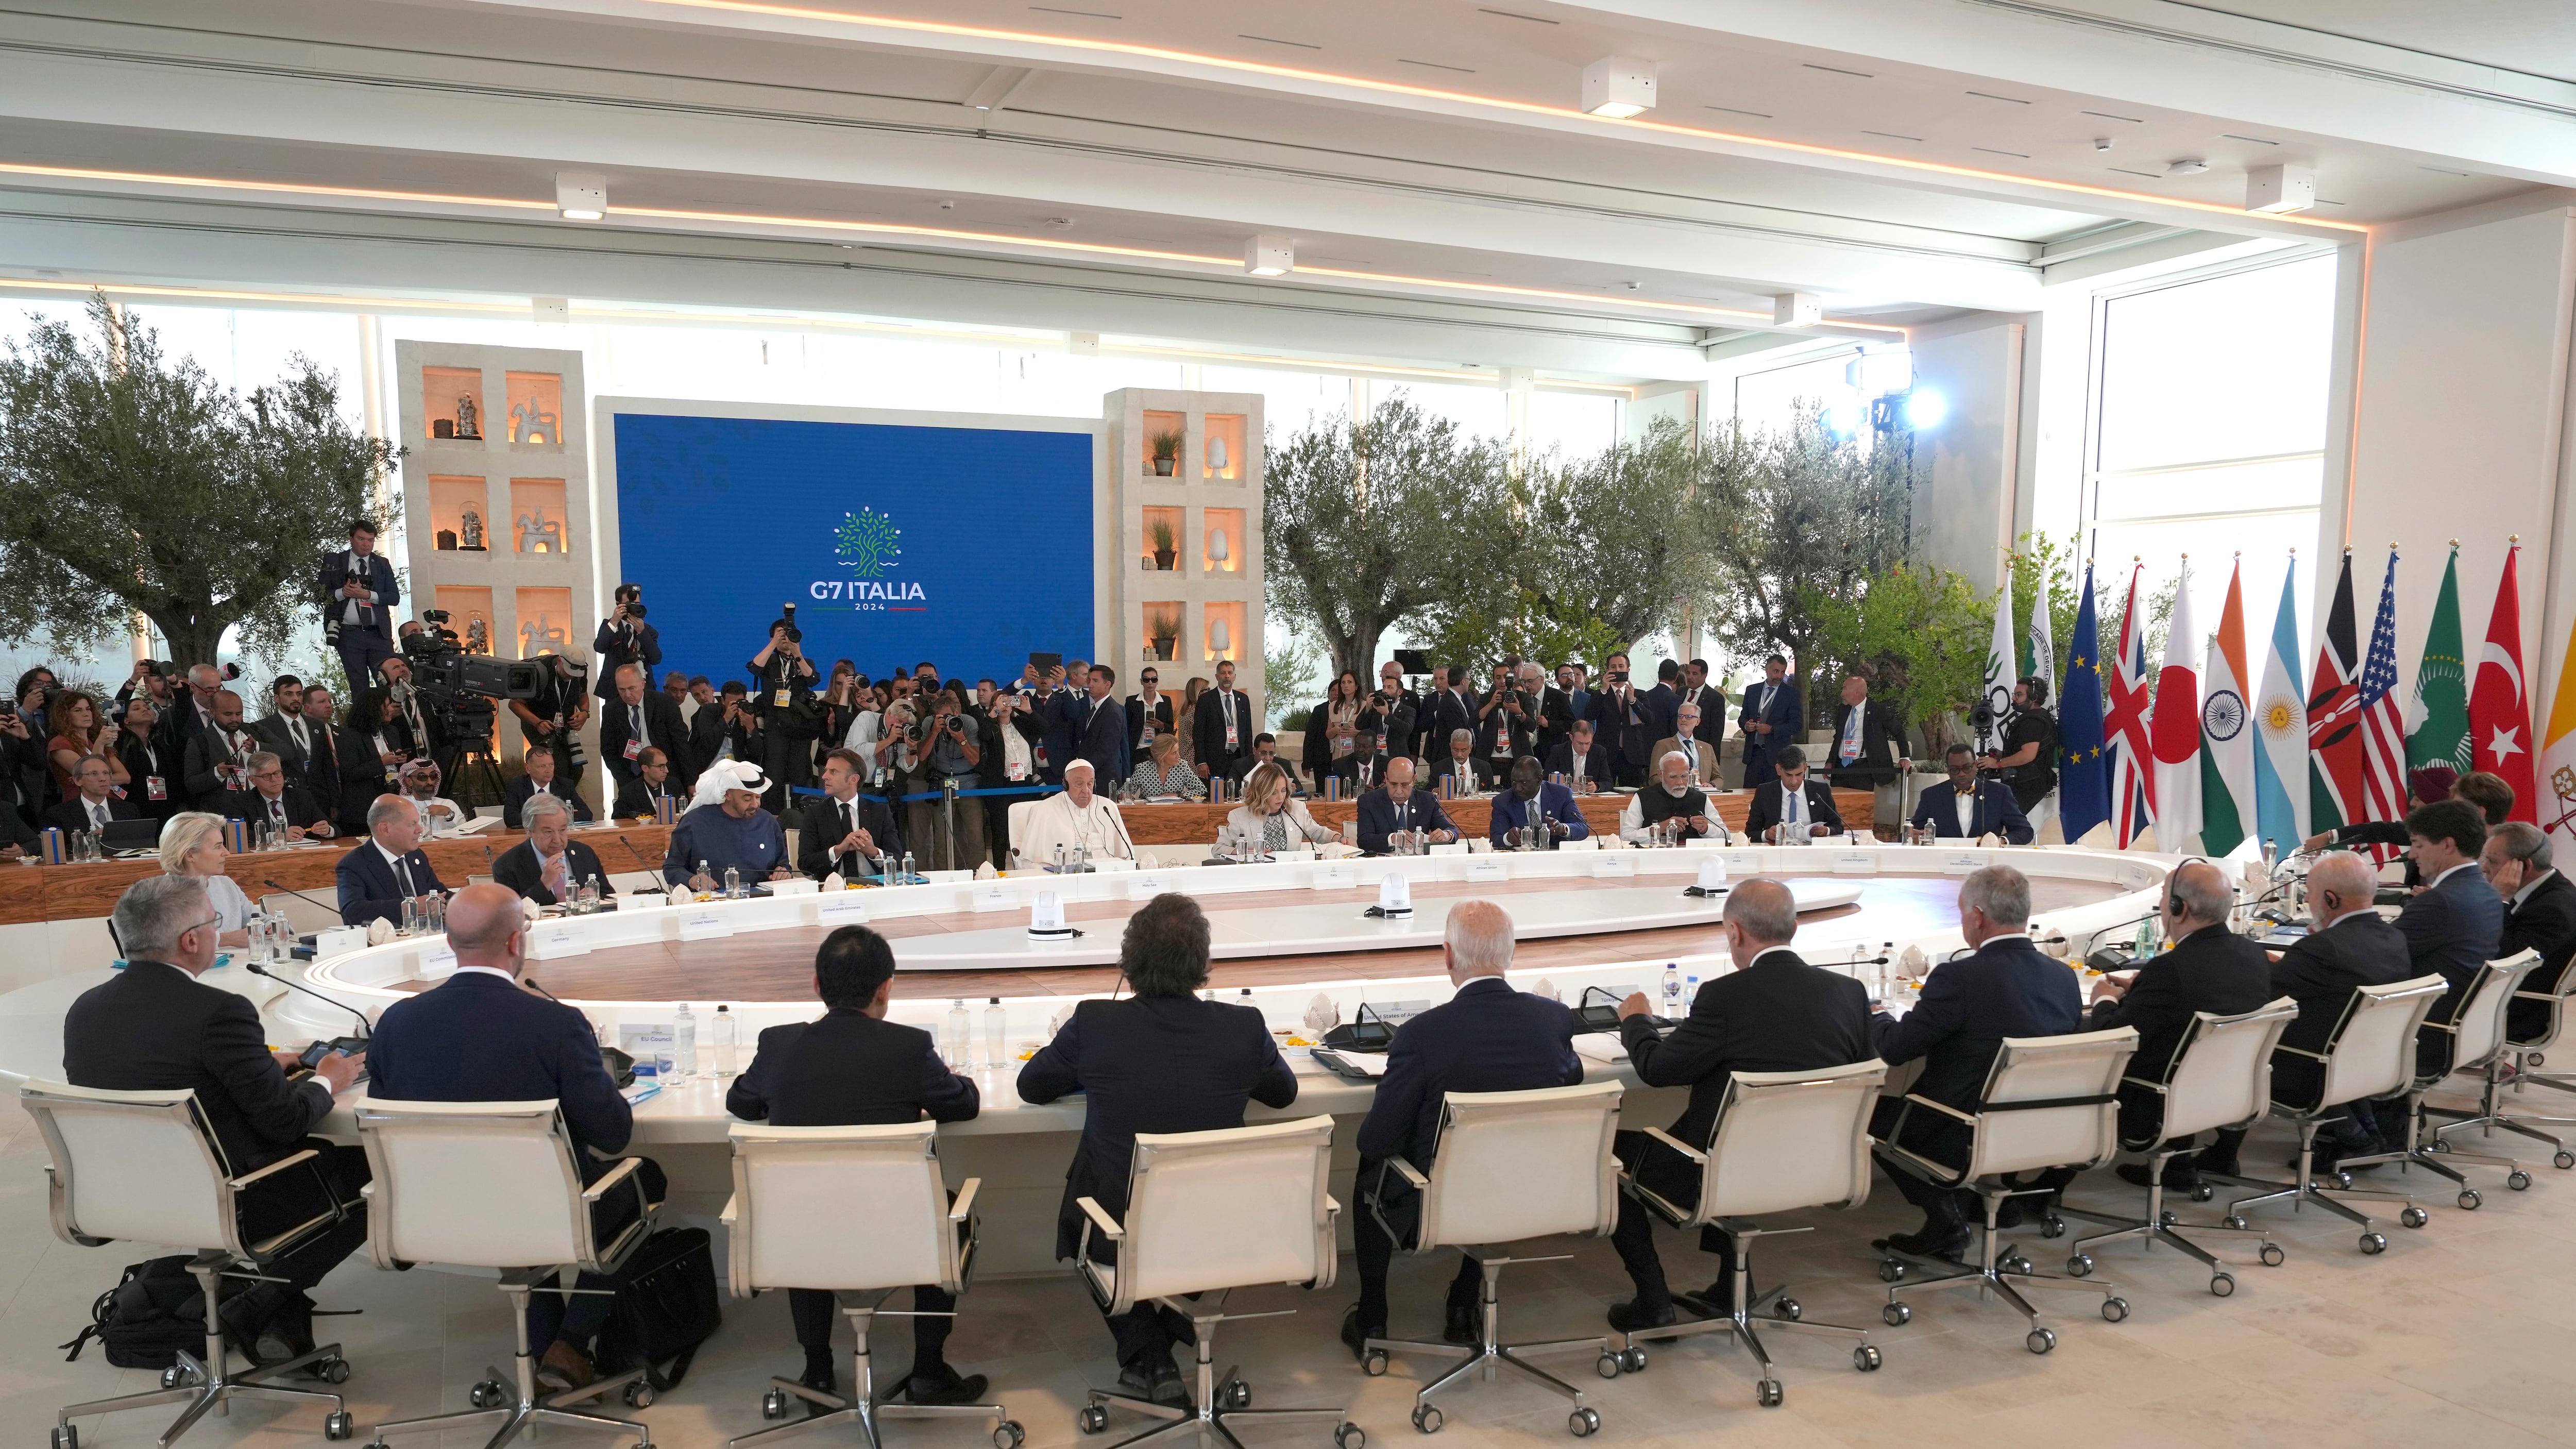 G7 world leaders and other leaders from guest nations attend a working session on artificial intelligence, on day two of the 50th G7 summit at Borgo Egnazia, southern Italy (Christopher Furlong/Pool Photo via AP)